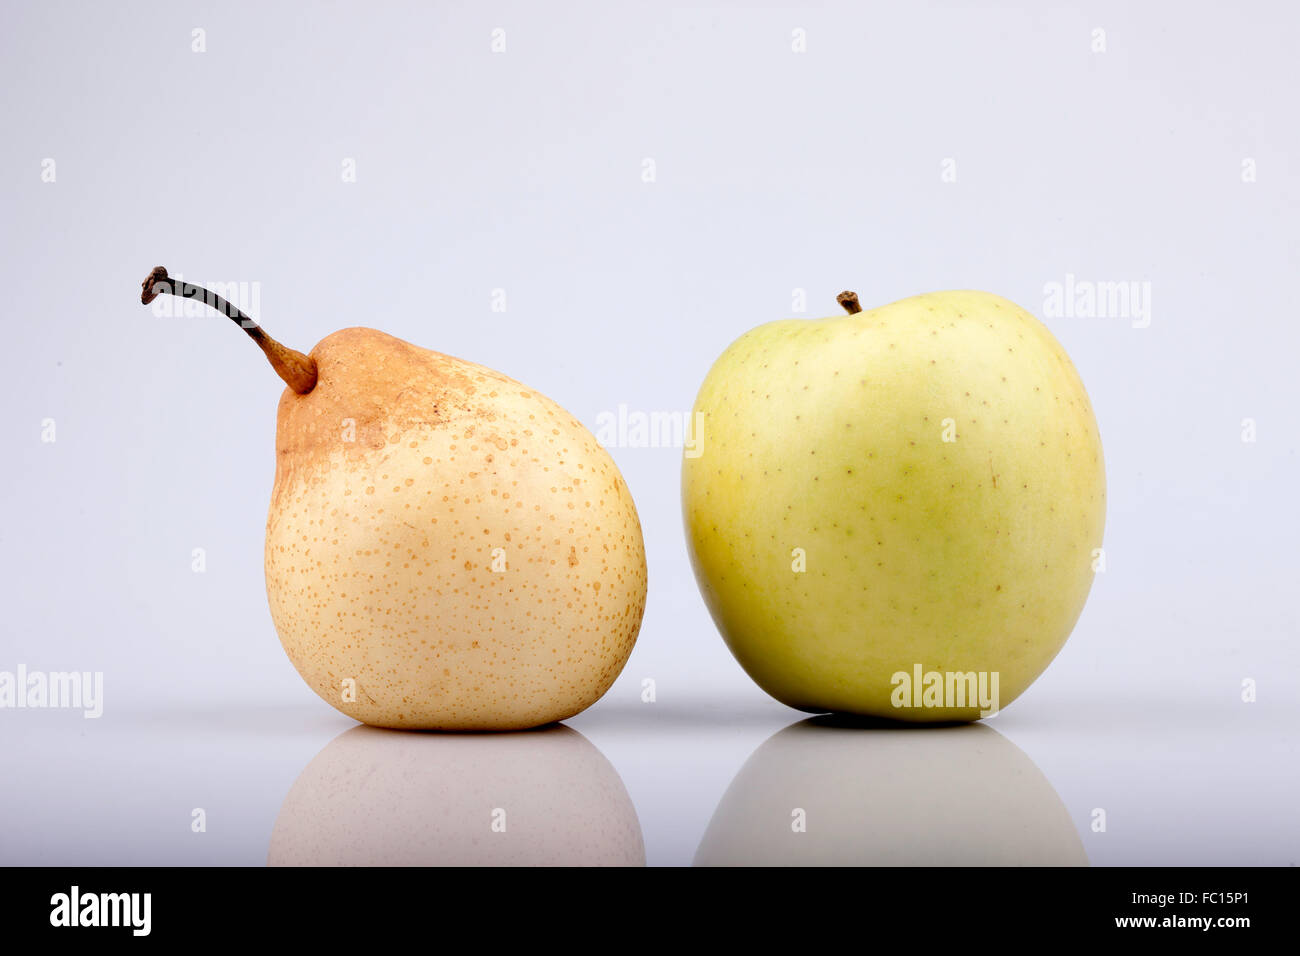 pear and apple on white background Stock Photo